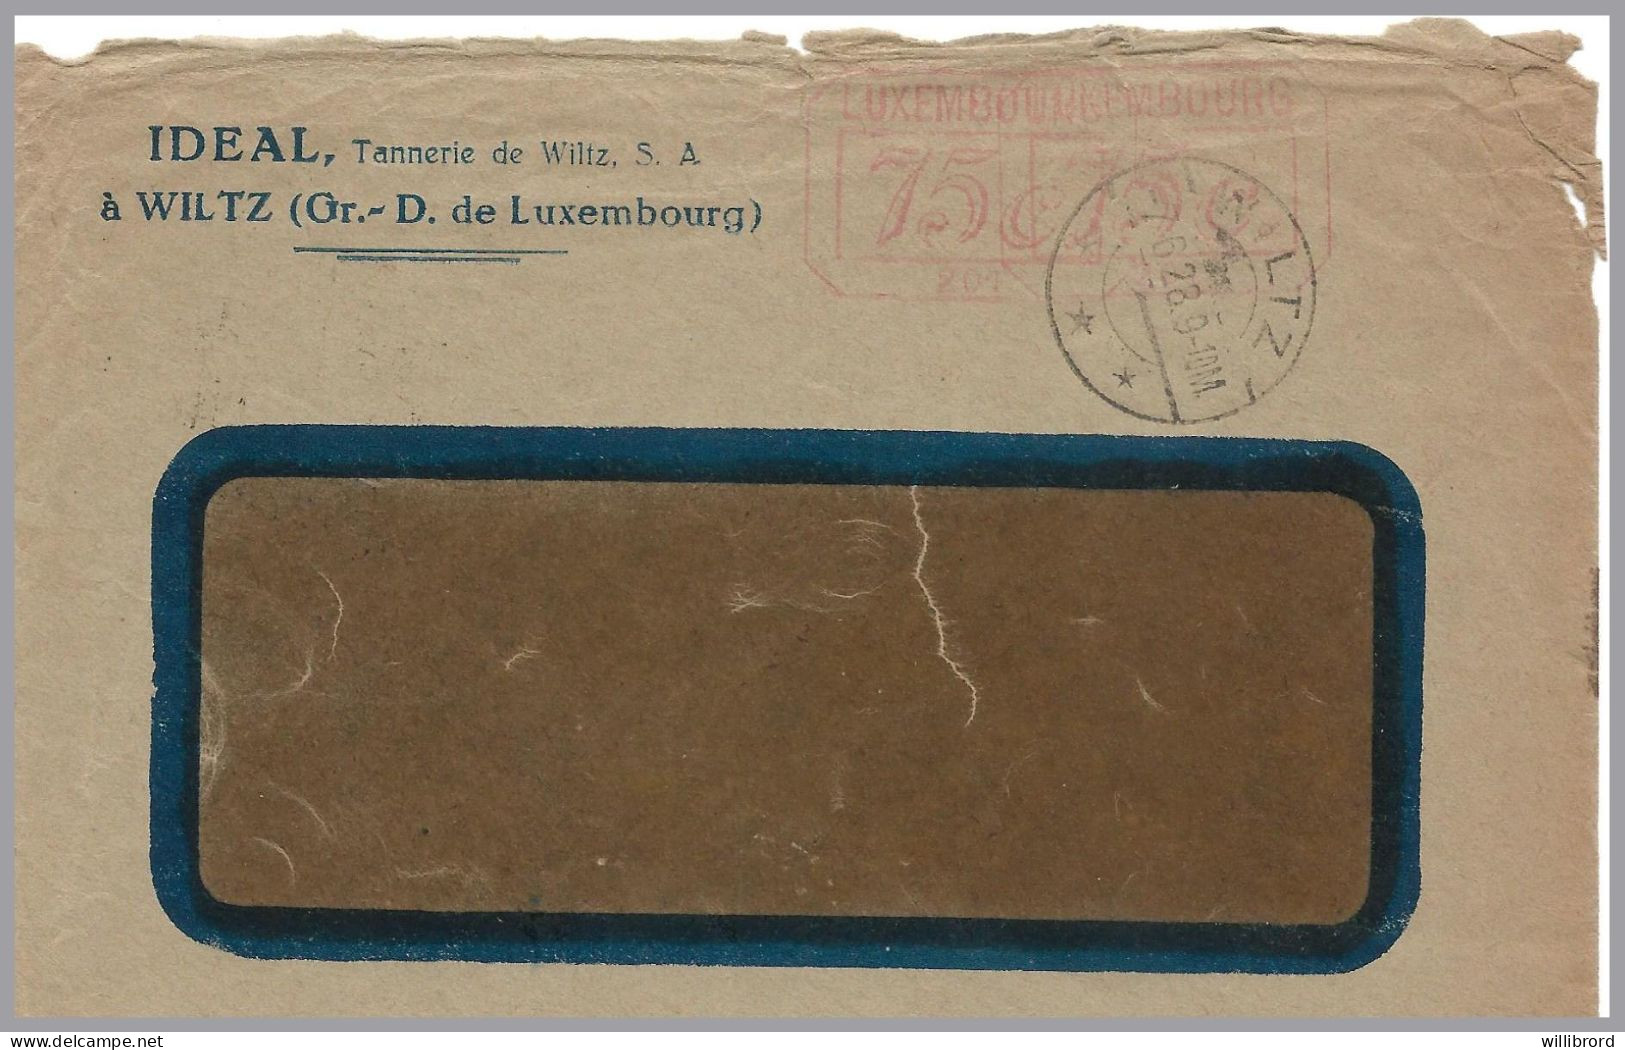 LUXEMBOURG - 1928 Timbrographe 201 Wiltz To Italy - RAREST Luxembourg Meter Imprint! Intl. Postage Meter Stp.Cat. = $100 - Covers & Documents